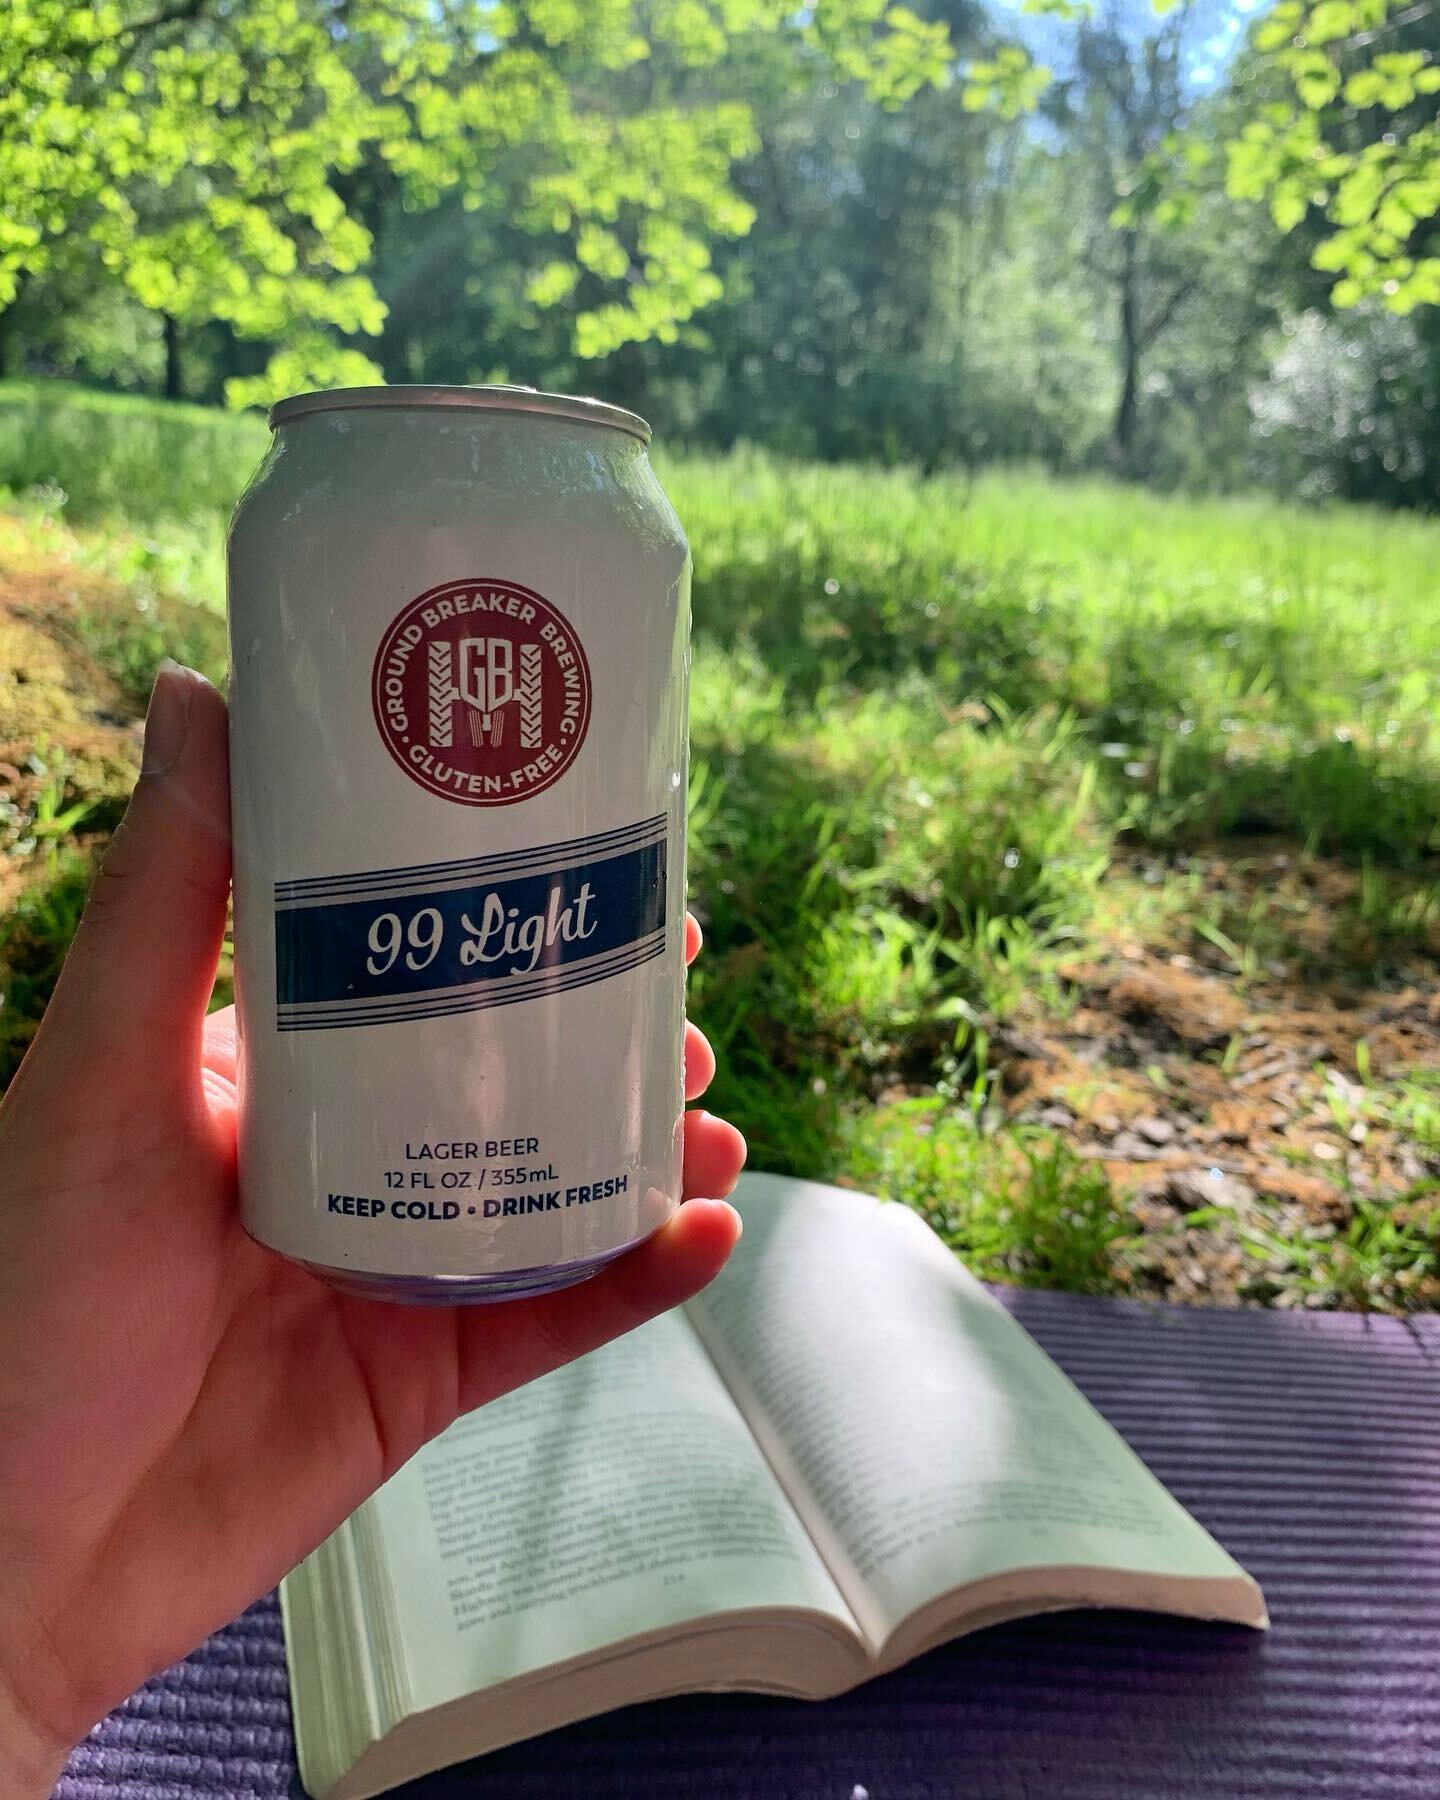 Our Beertender Michela says, &ldquo;99 Light is my favorite beer for drinking at the park and relaxing with a good book.&rdquo; 
Where is your favorite place to enjoy 99 Light?